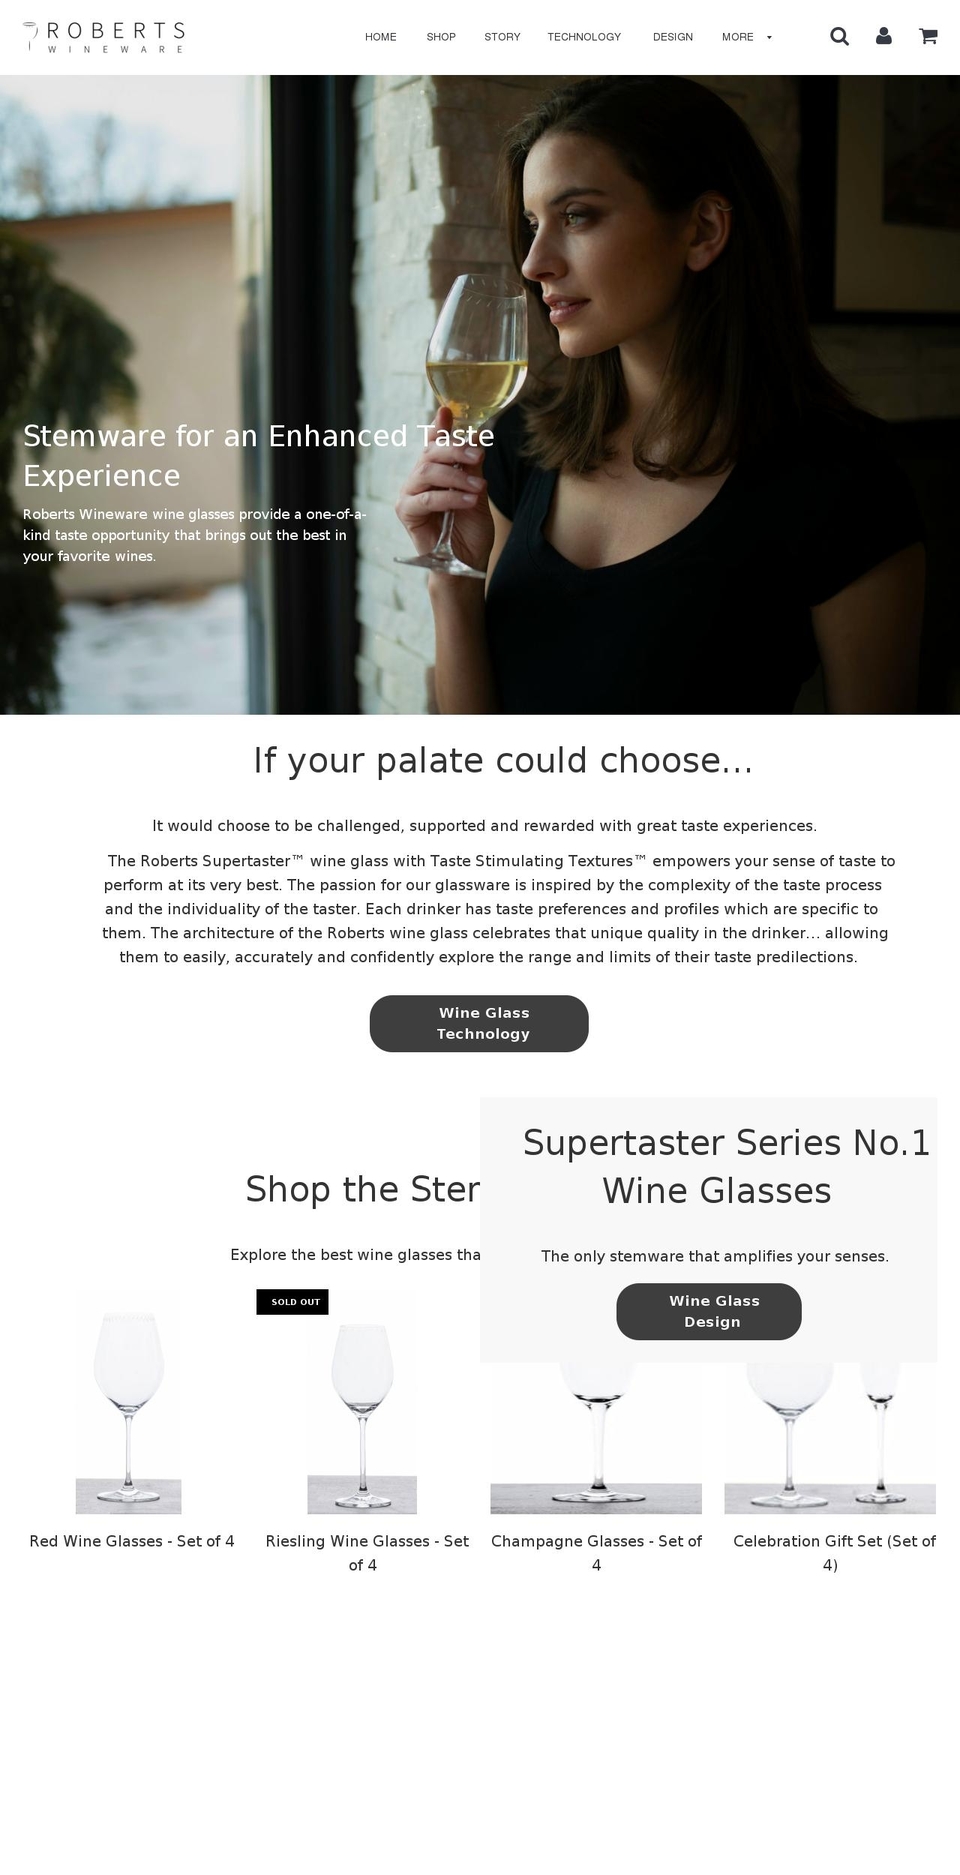 Copy of Flow Shopify theme site example robertswineware.com